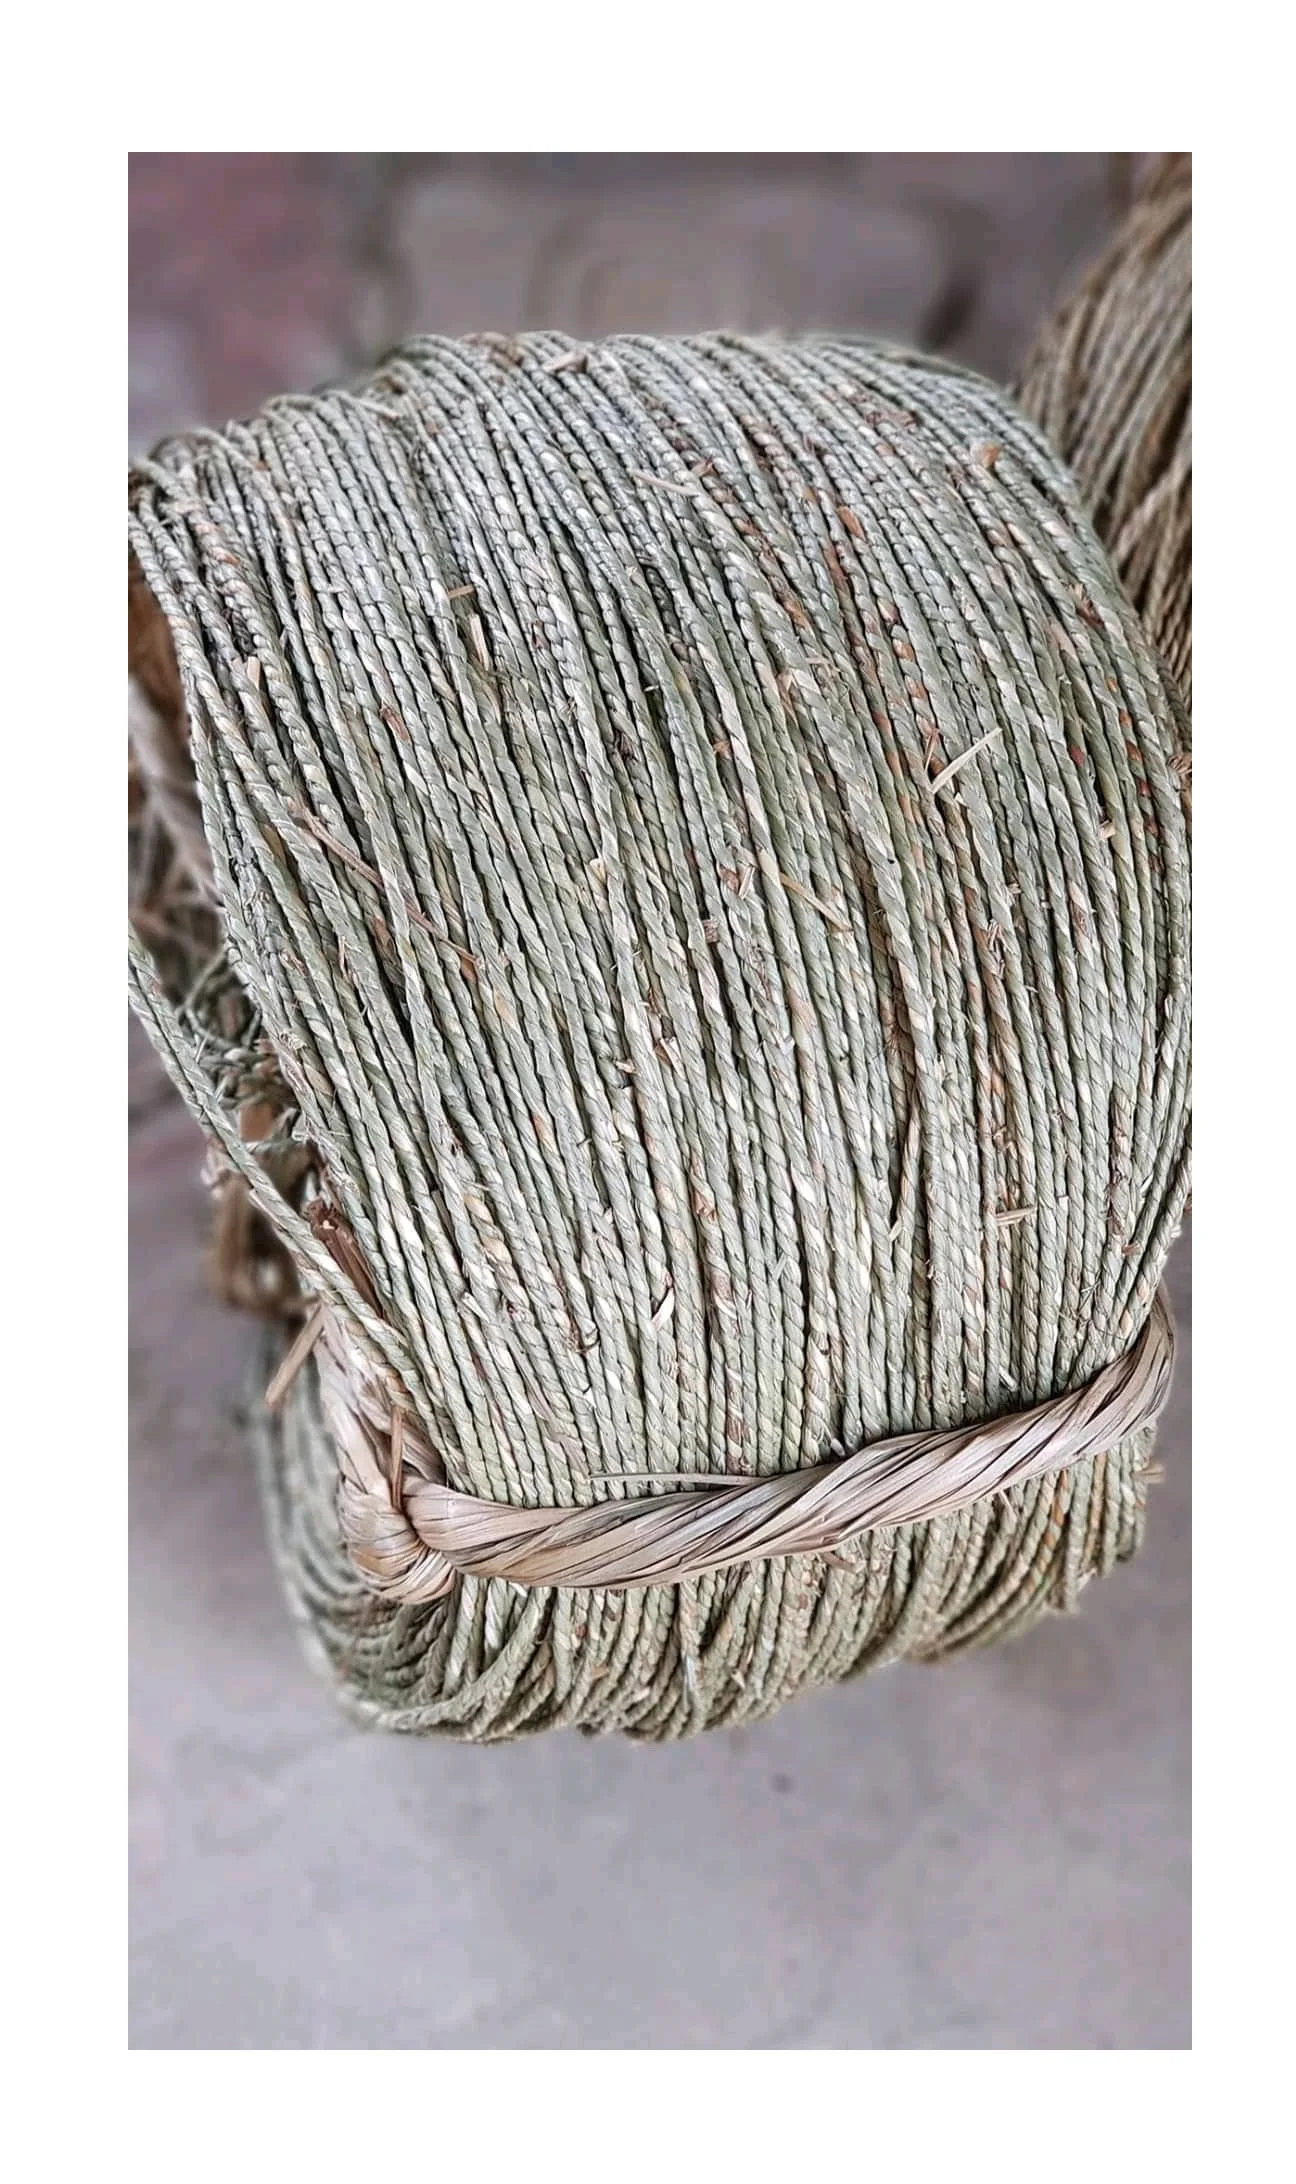 Color-Fast Dried Sea Grass Material Weaving Seagrass Rope for Craft  Products - China Seagrass and Sea Grass price